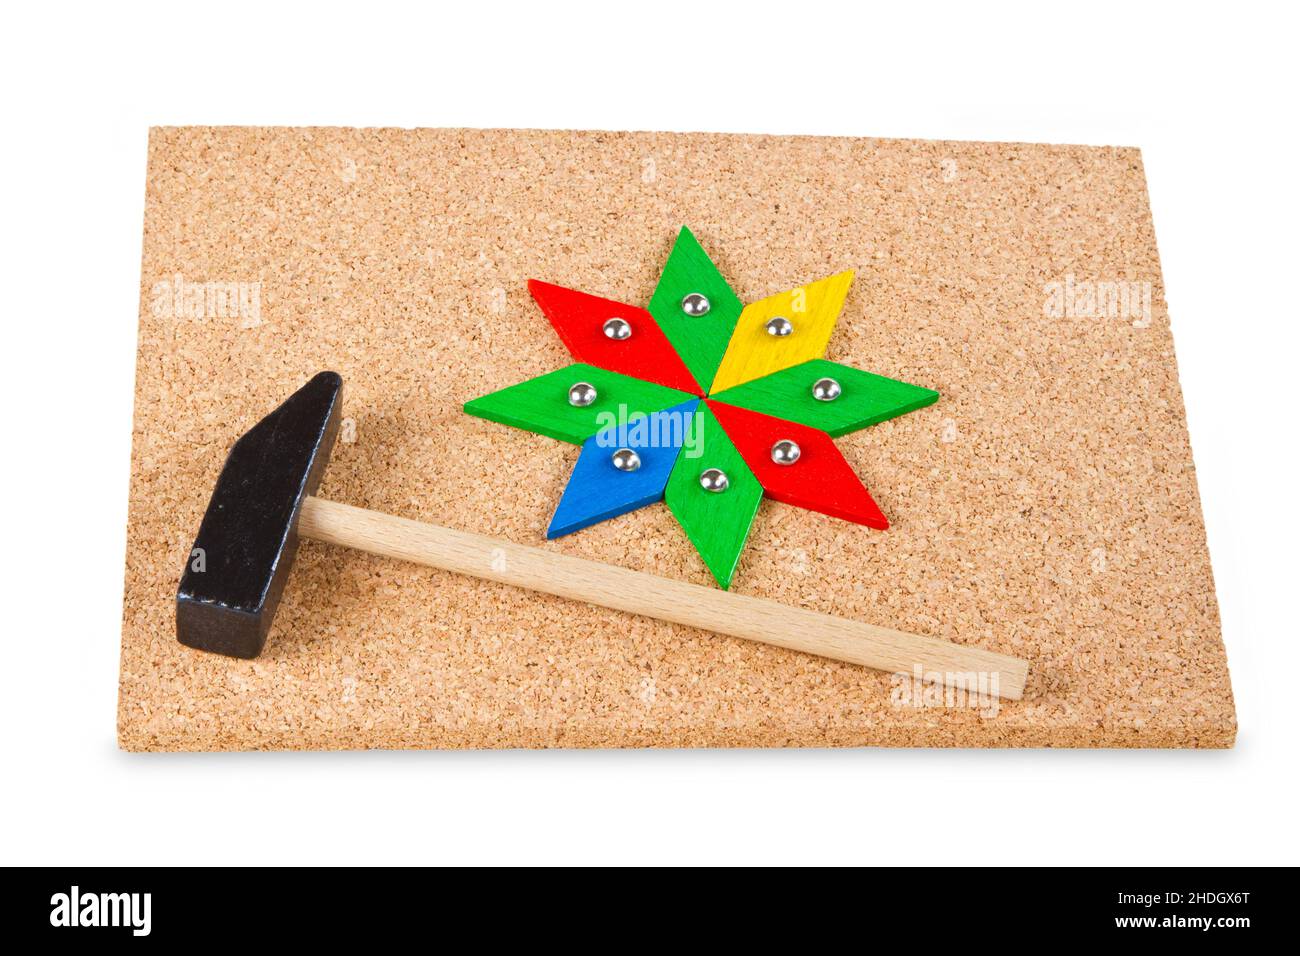 Hammer Game High Resolution Stock Photography and Images - Alamy